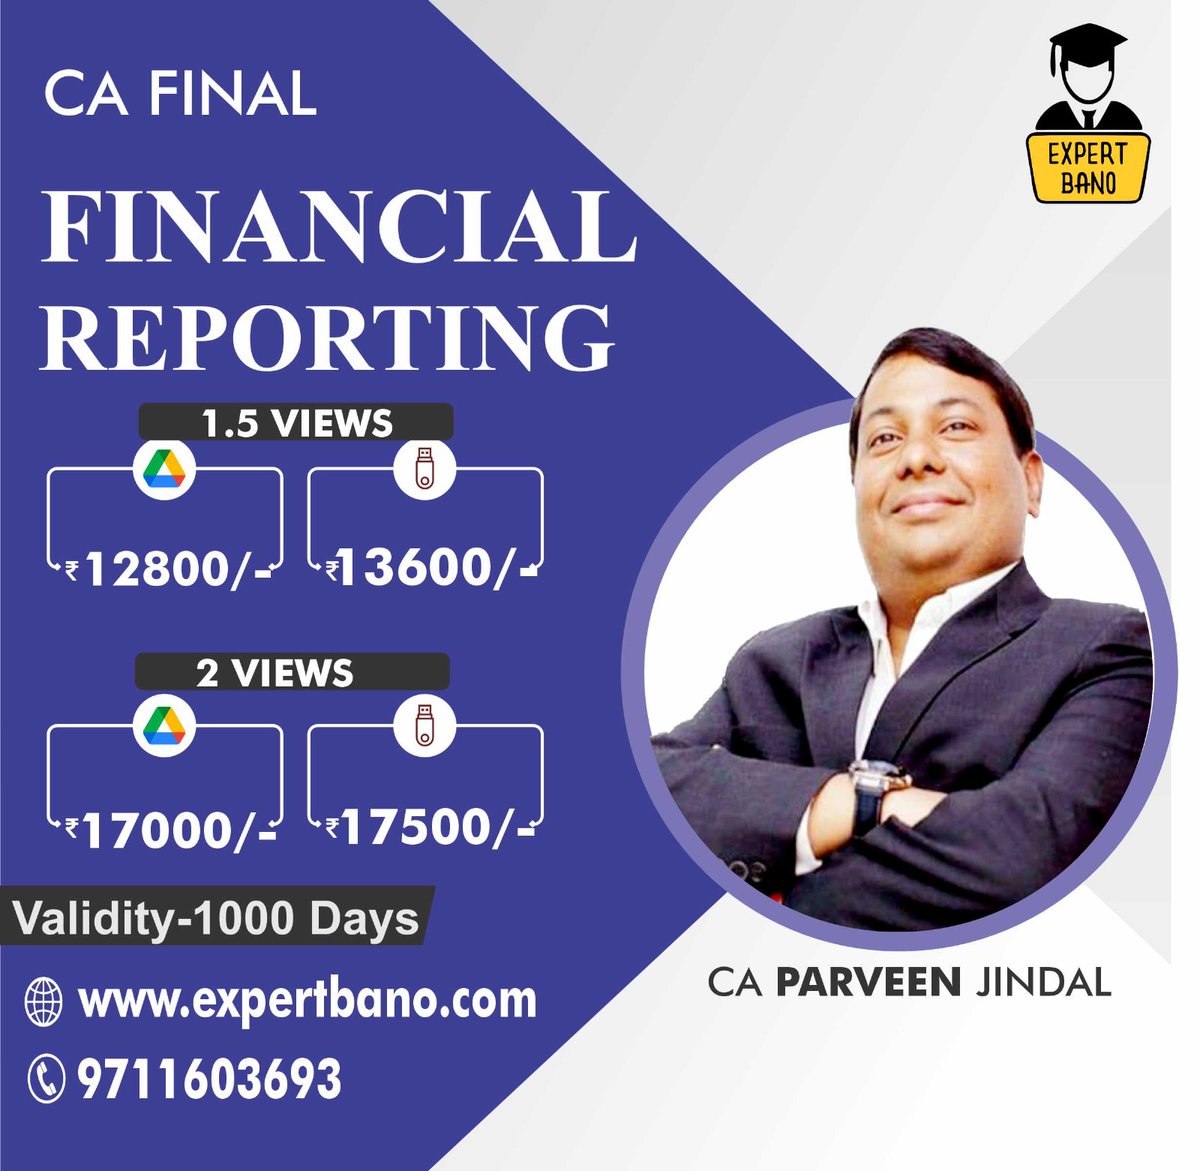 CA Final Financial Reporting by CA Parveen Jindal.
To buy, pls Visit: bit.ly/3jIohKU
Call at 9711603693 for inquires
#expertbano #cainteracc #cainteradvacc #caparveenjindal #caexams #caonlineclaas #Cafinalfr